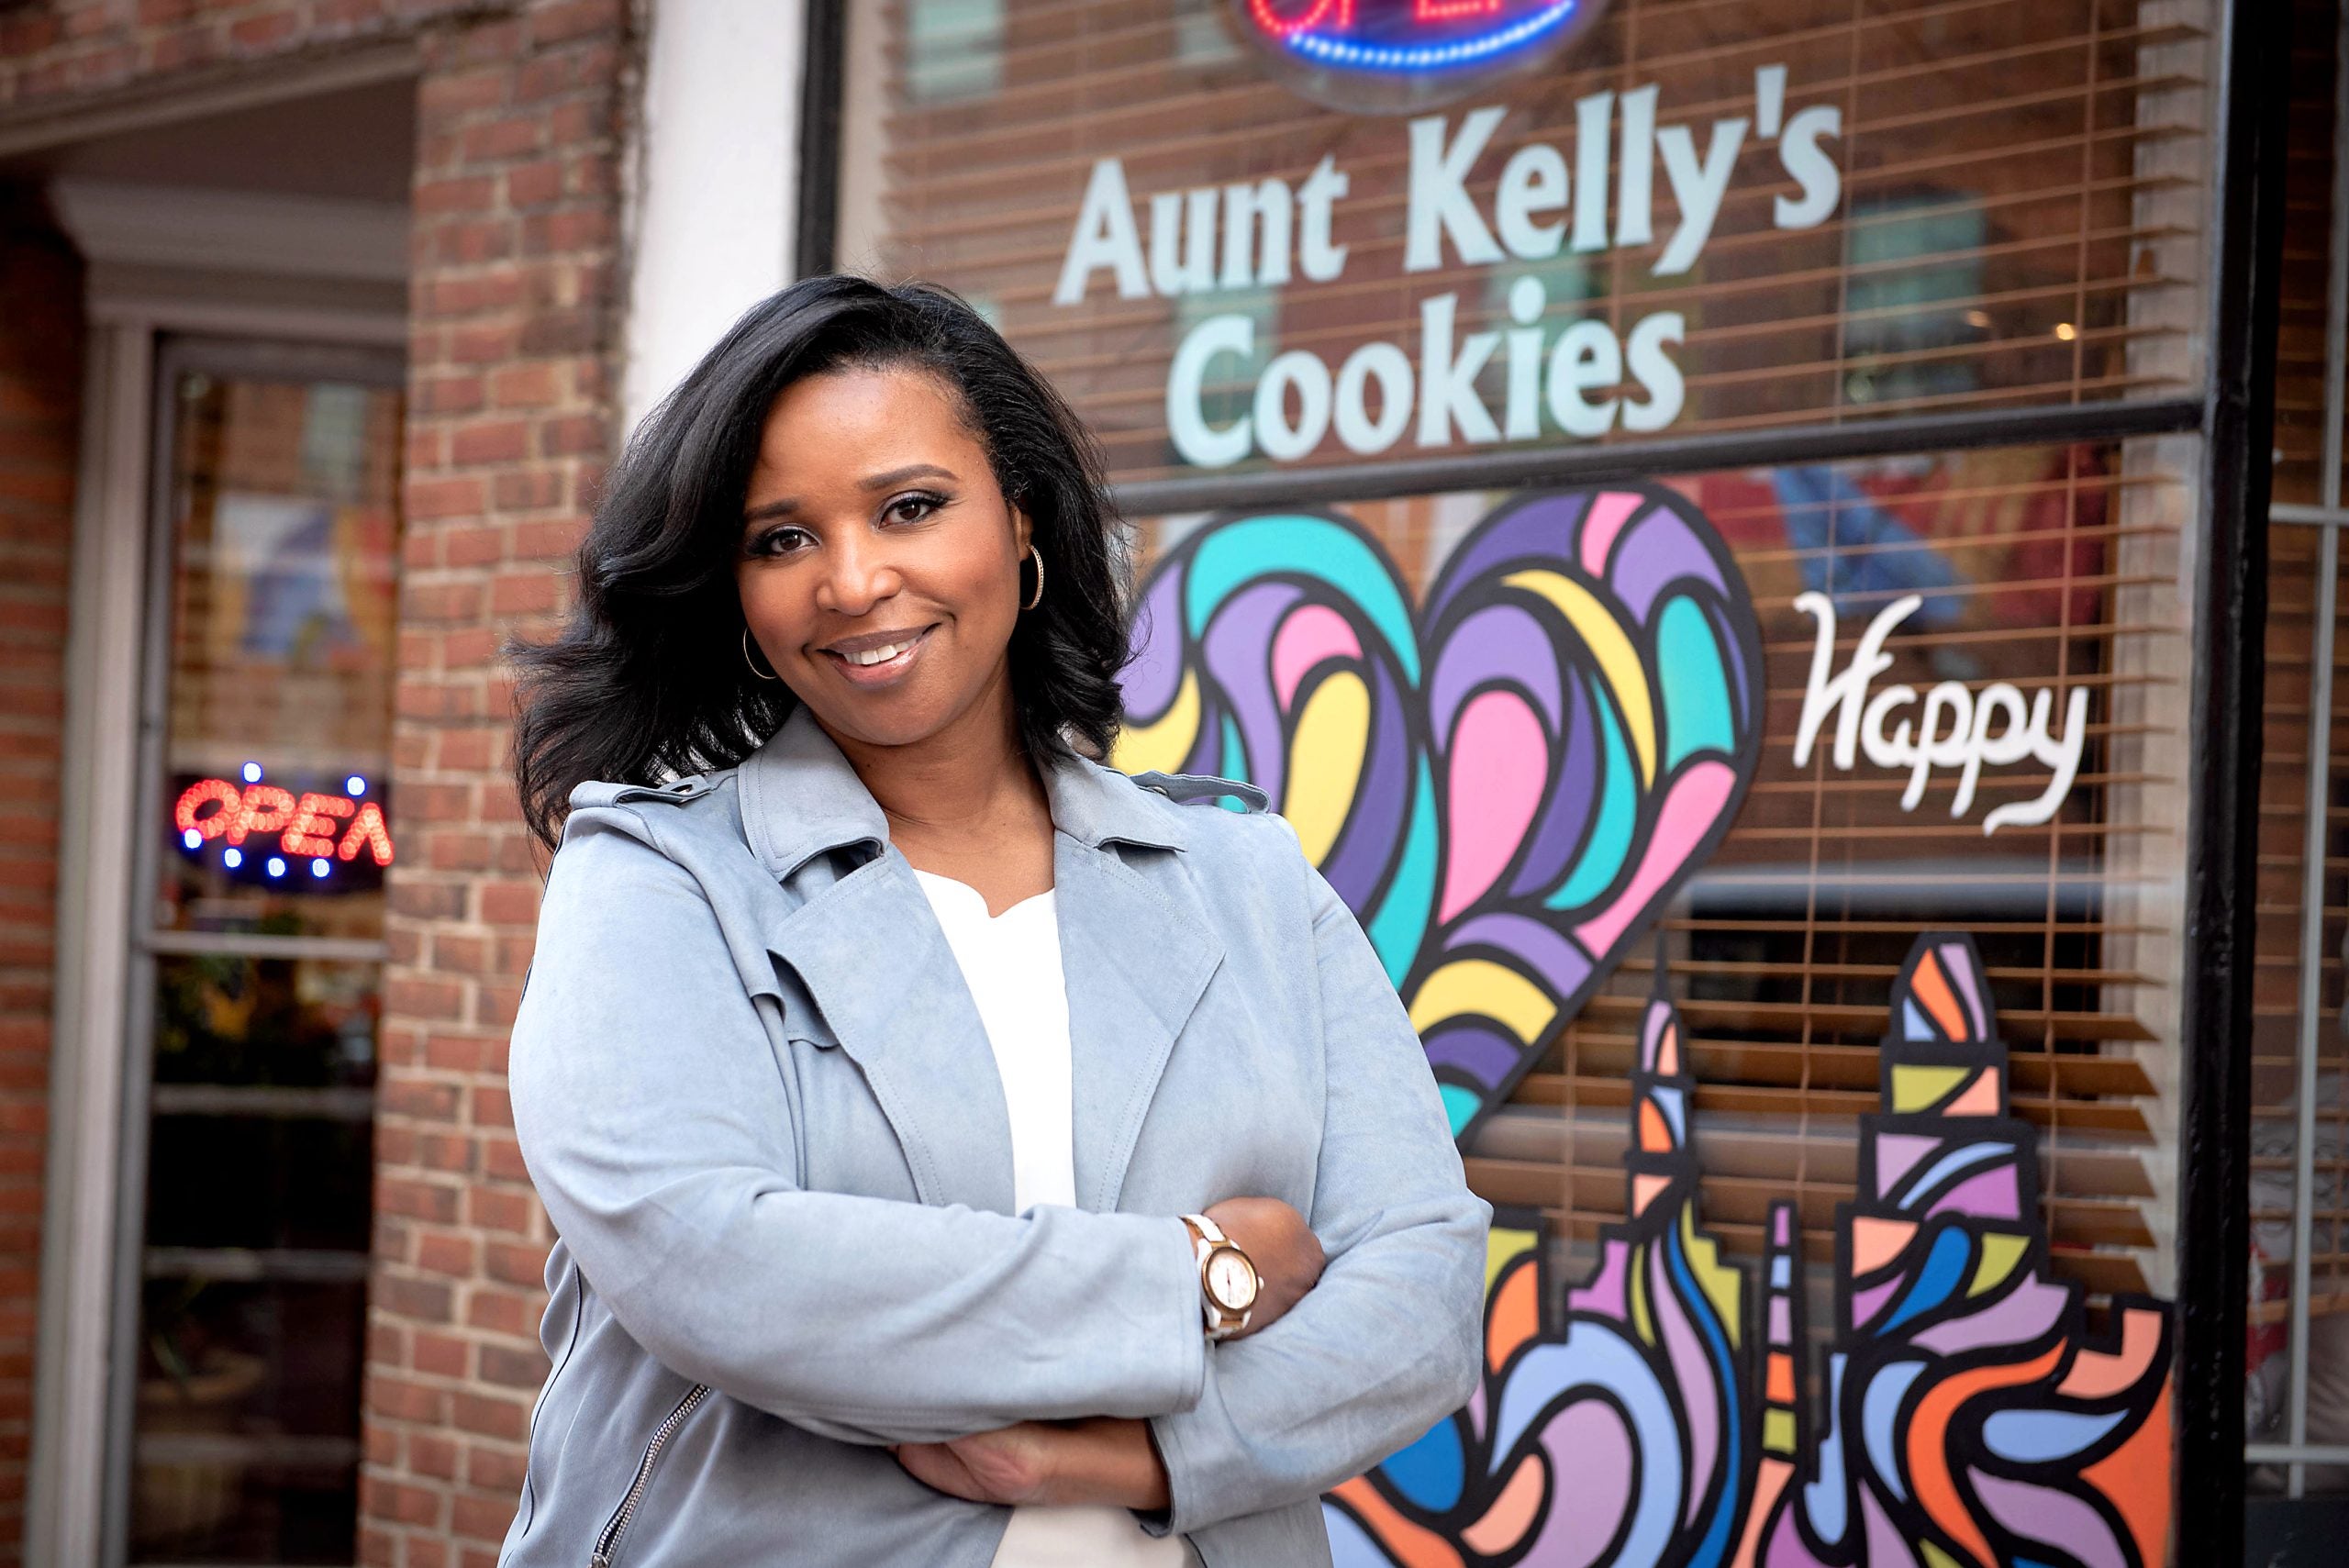 In Baltimore, A Black-Owned Cookie Shop Sees Sweet Success